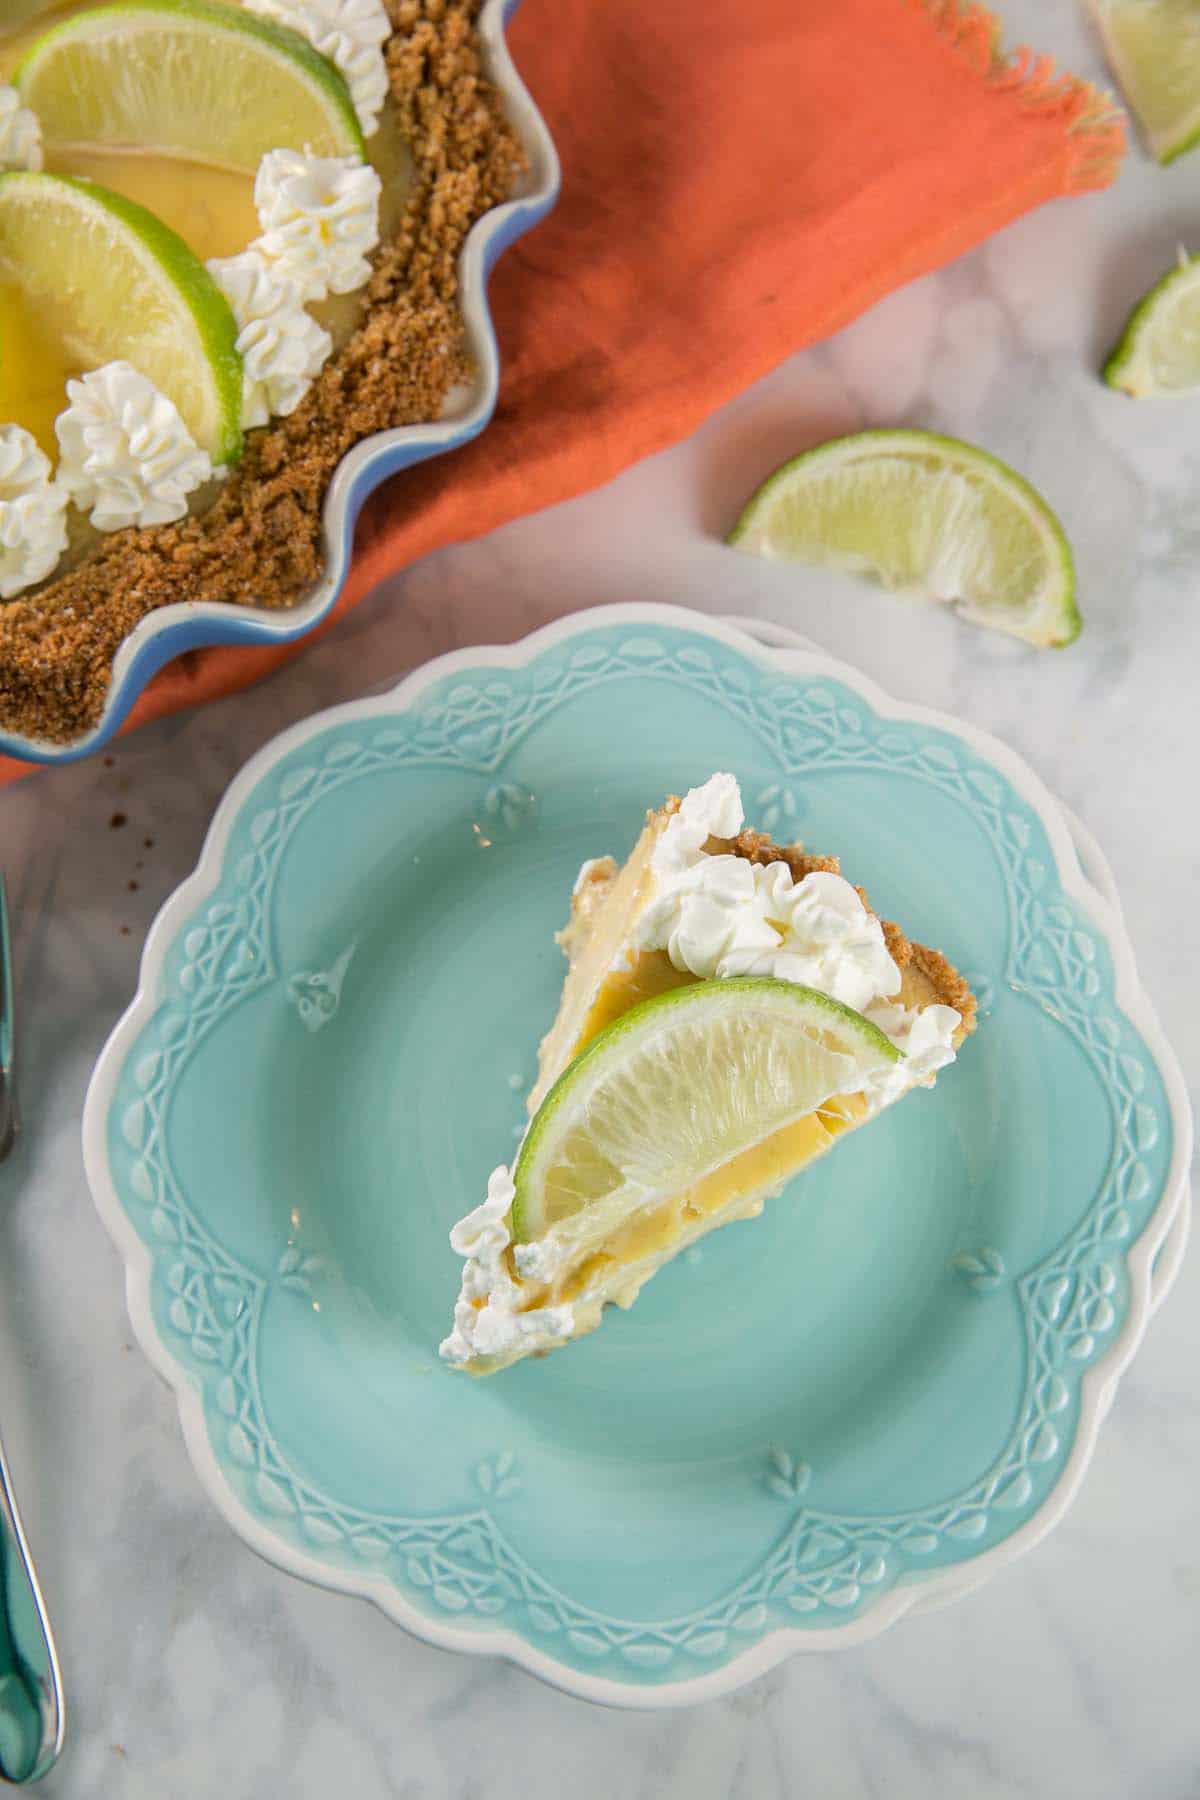 Tequila Lime Margarita Pie: Enjoy your margarita in dessert form, with a silky smooth lime custard made with tequila and triple sec and a salted graham crust. Make ahead for easy entertaining! {bunsenburnerbakery.com} #pie #margaritapie #cincodemayo #mexican